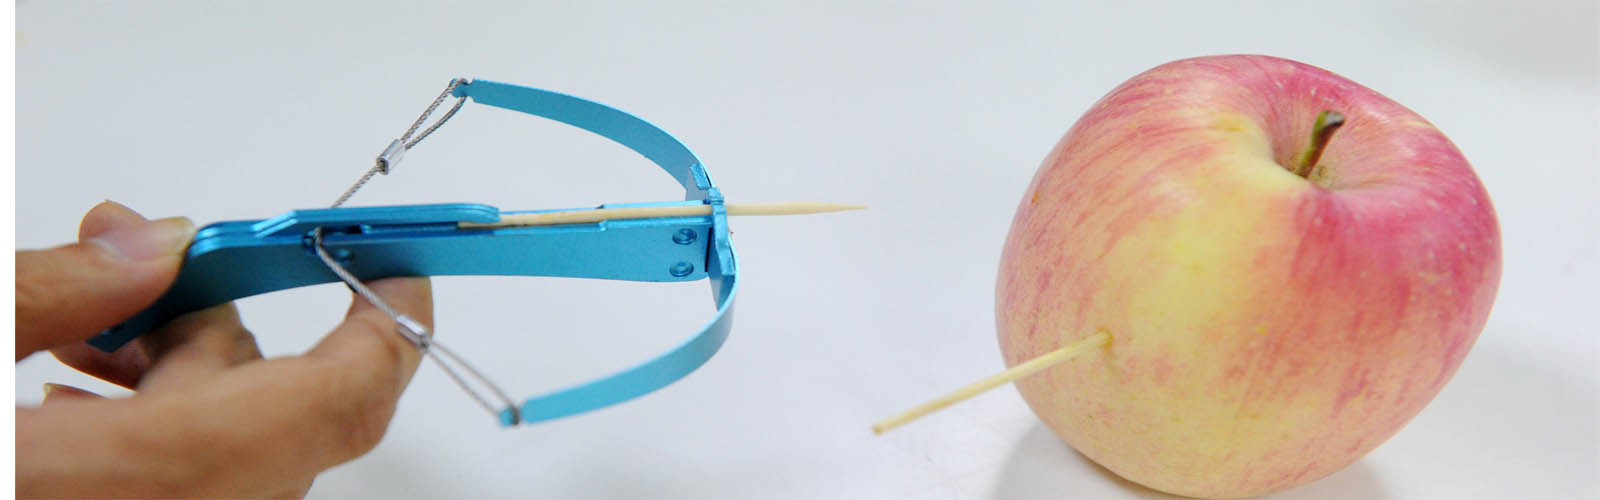 Toothpick crossbow craze has China quivering